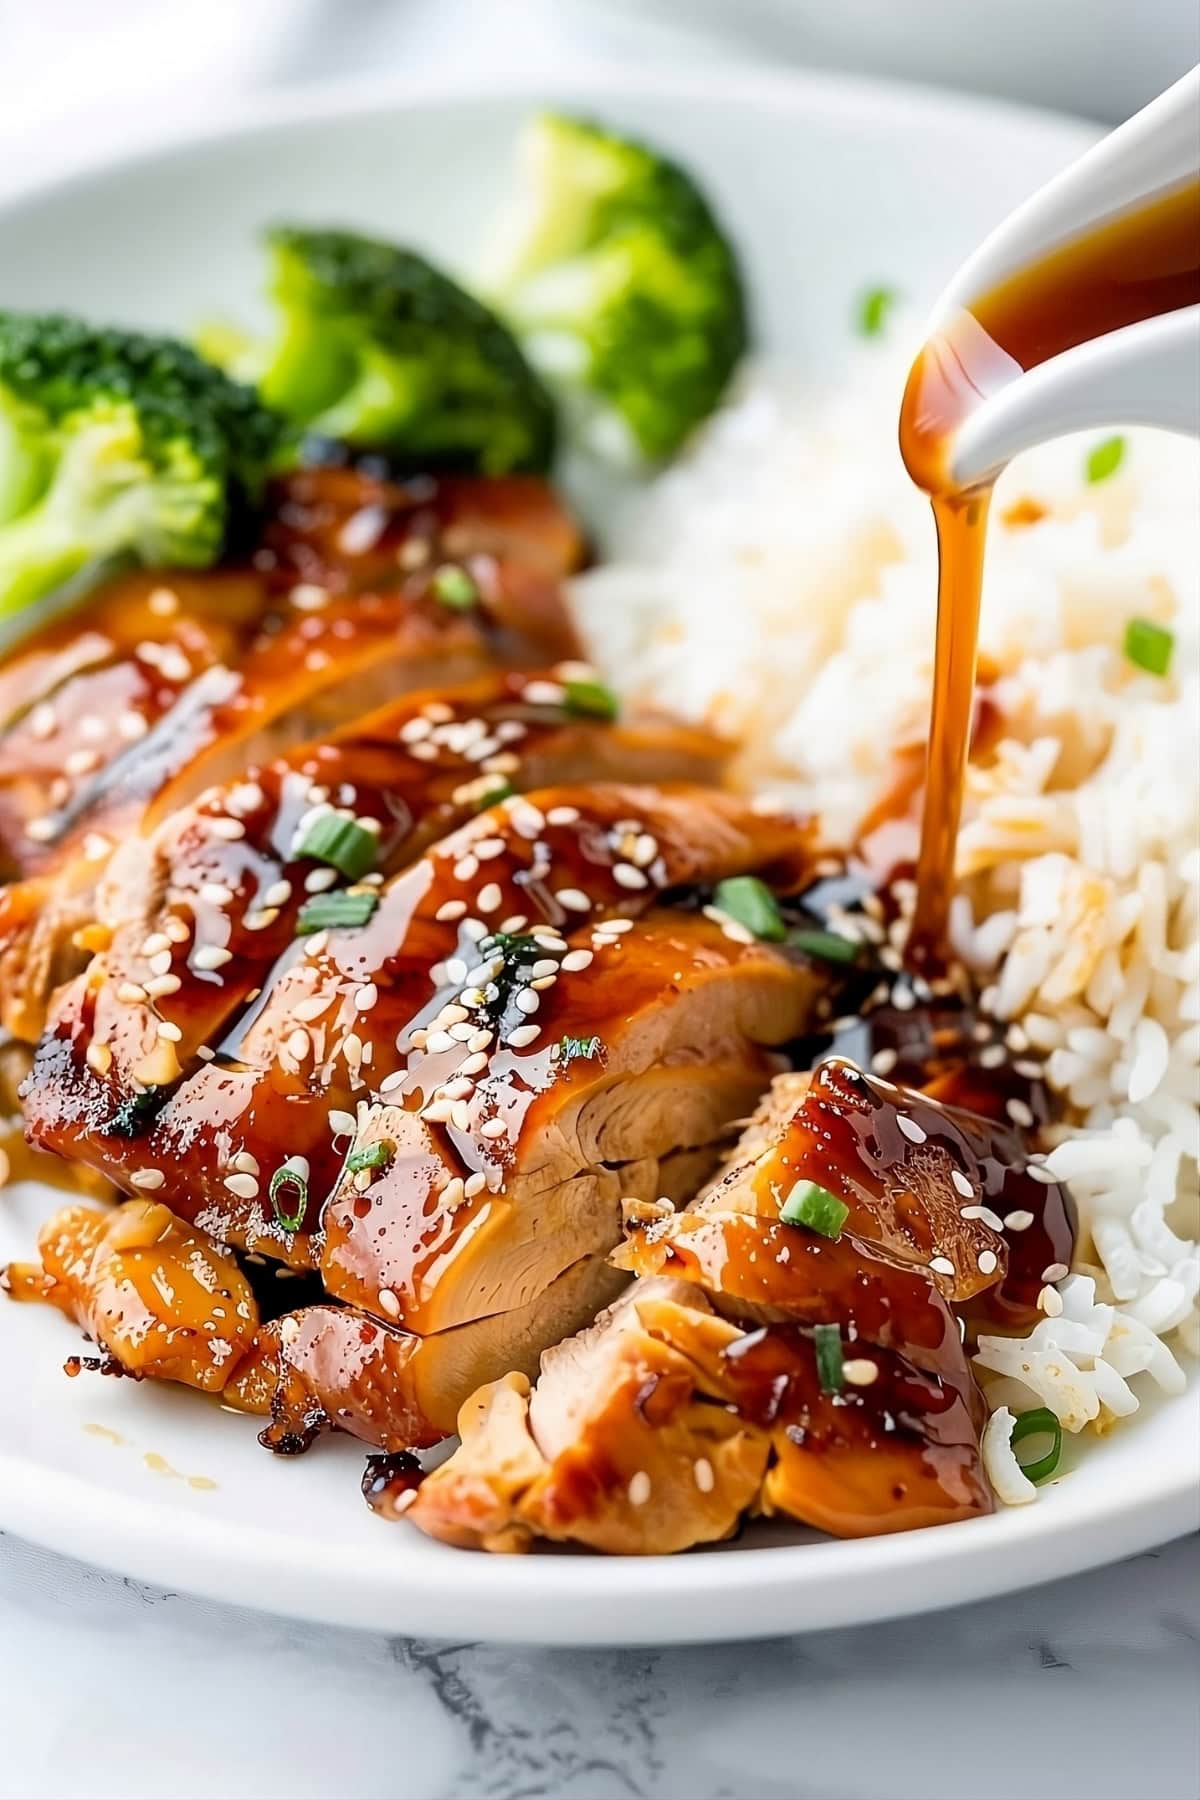 Teriyaki sauce poured to sliced chicken thigh with rice served with rice and broccoli